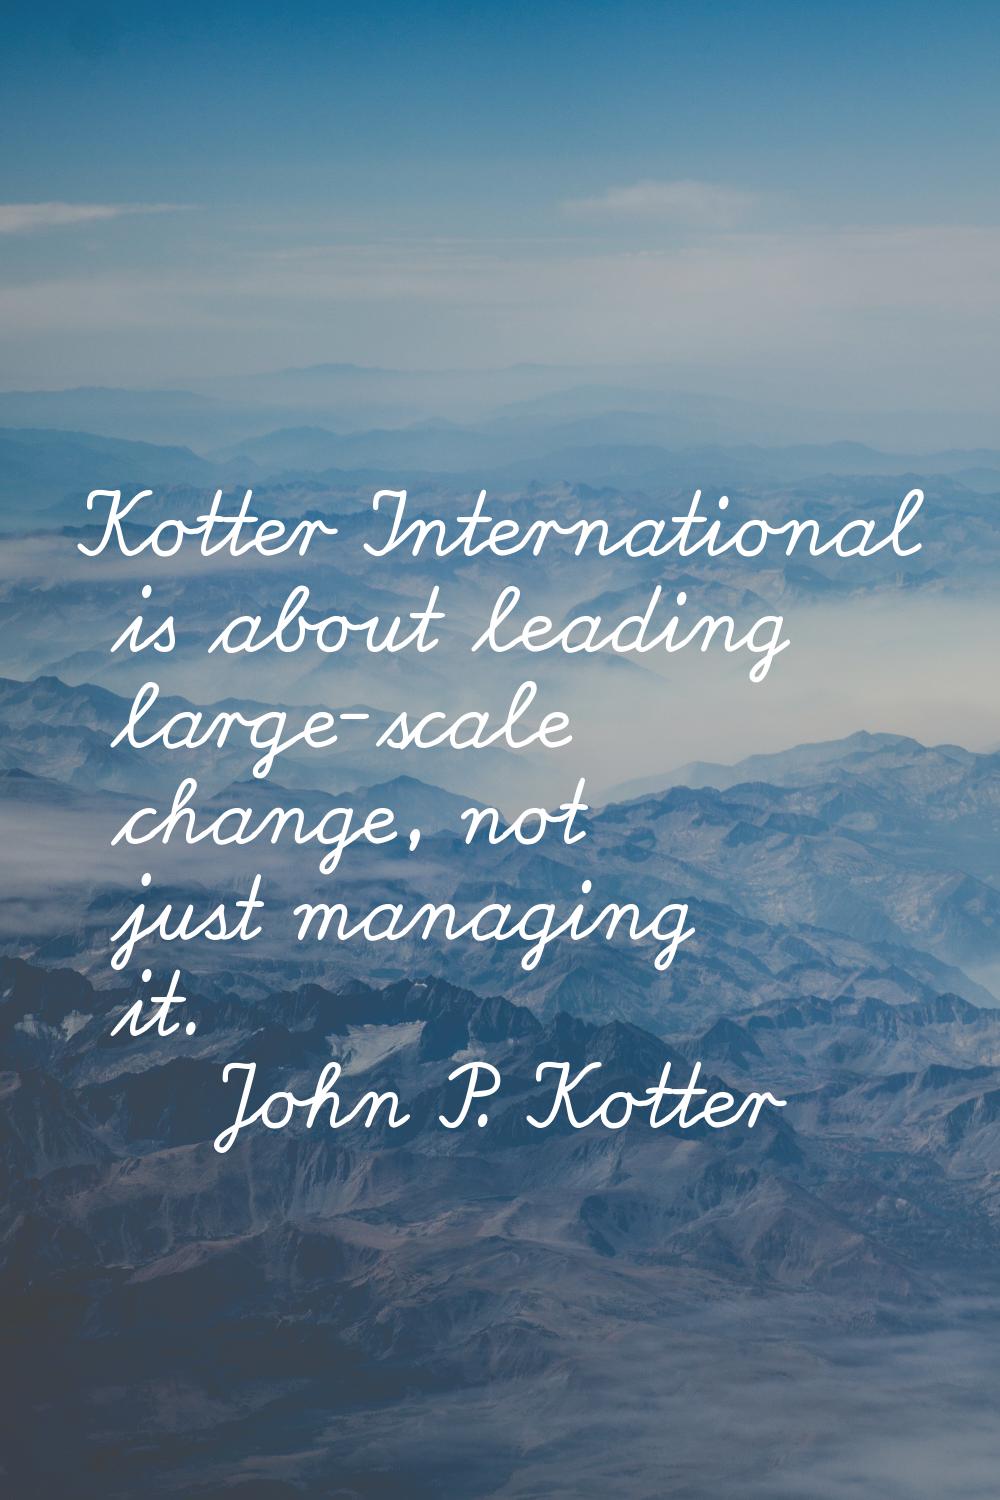 Kotter International is about leading large-scale change, not just managing it.